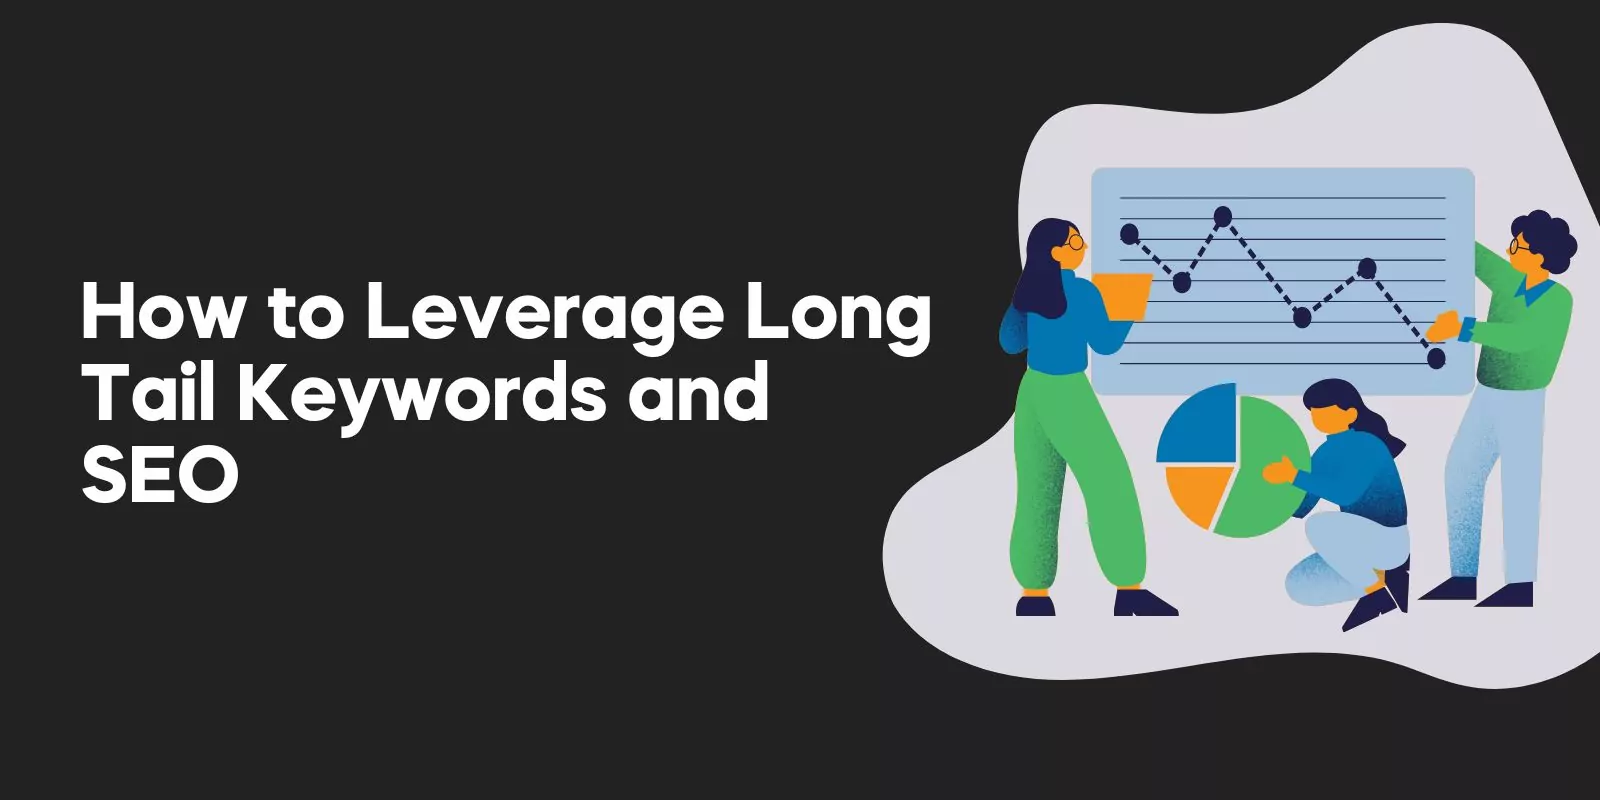 How to Leverage Long Tail Keywords and SEO